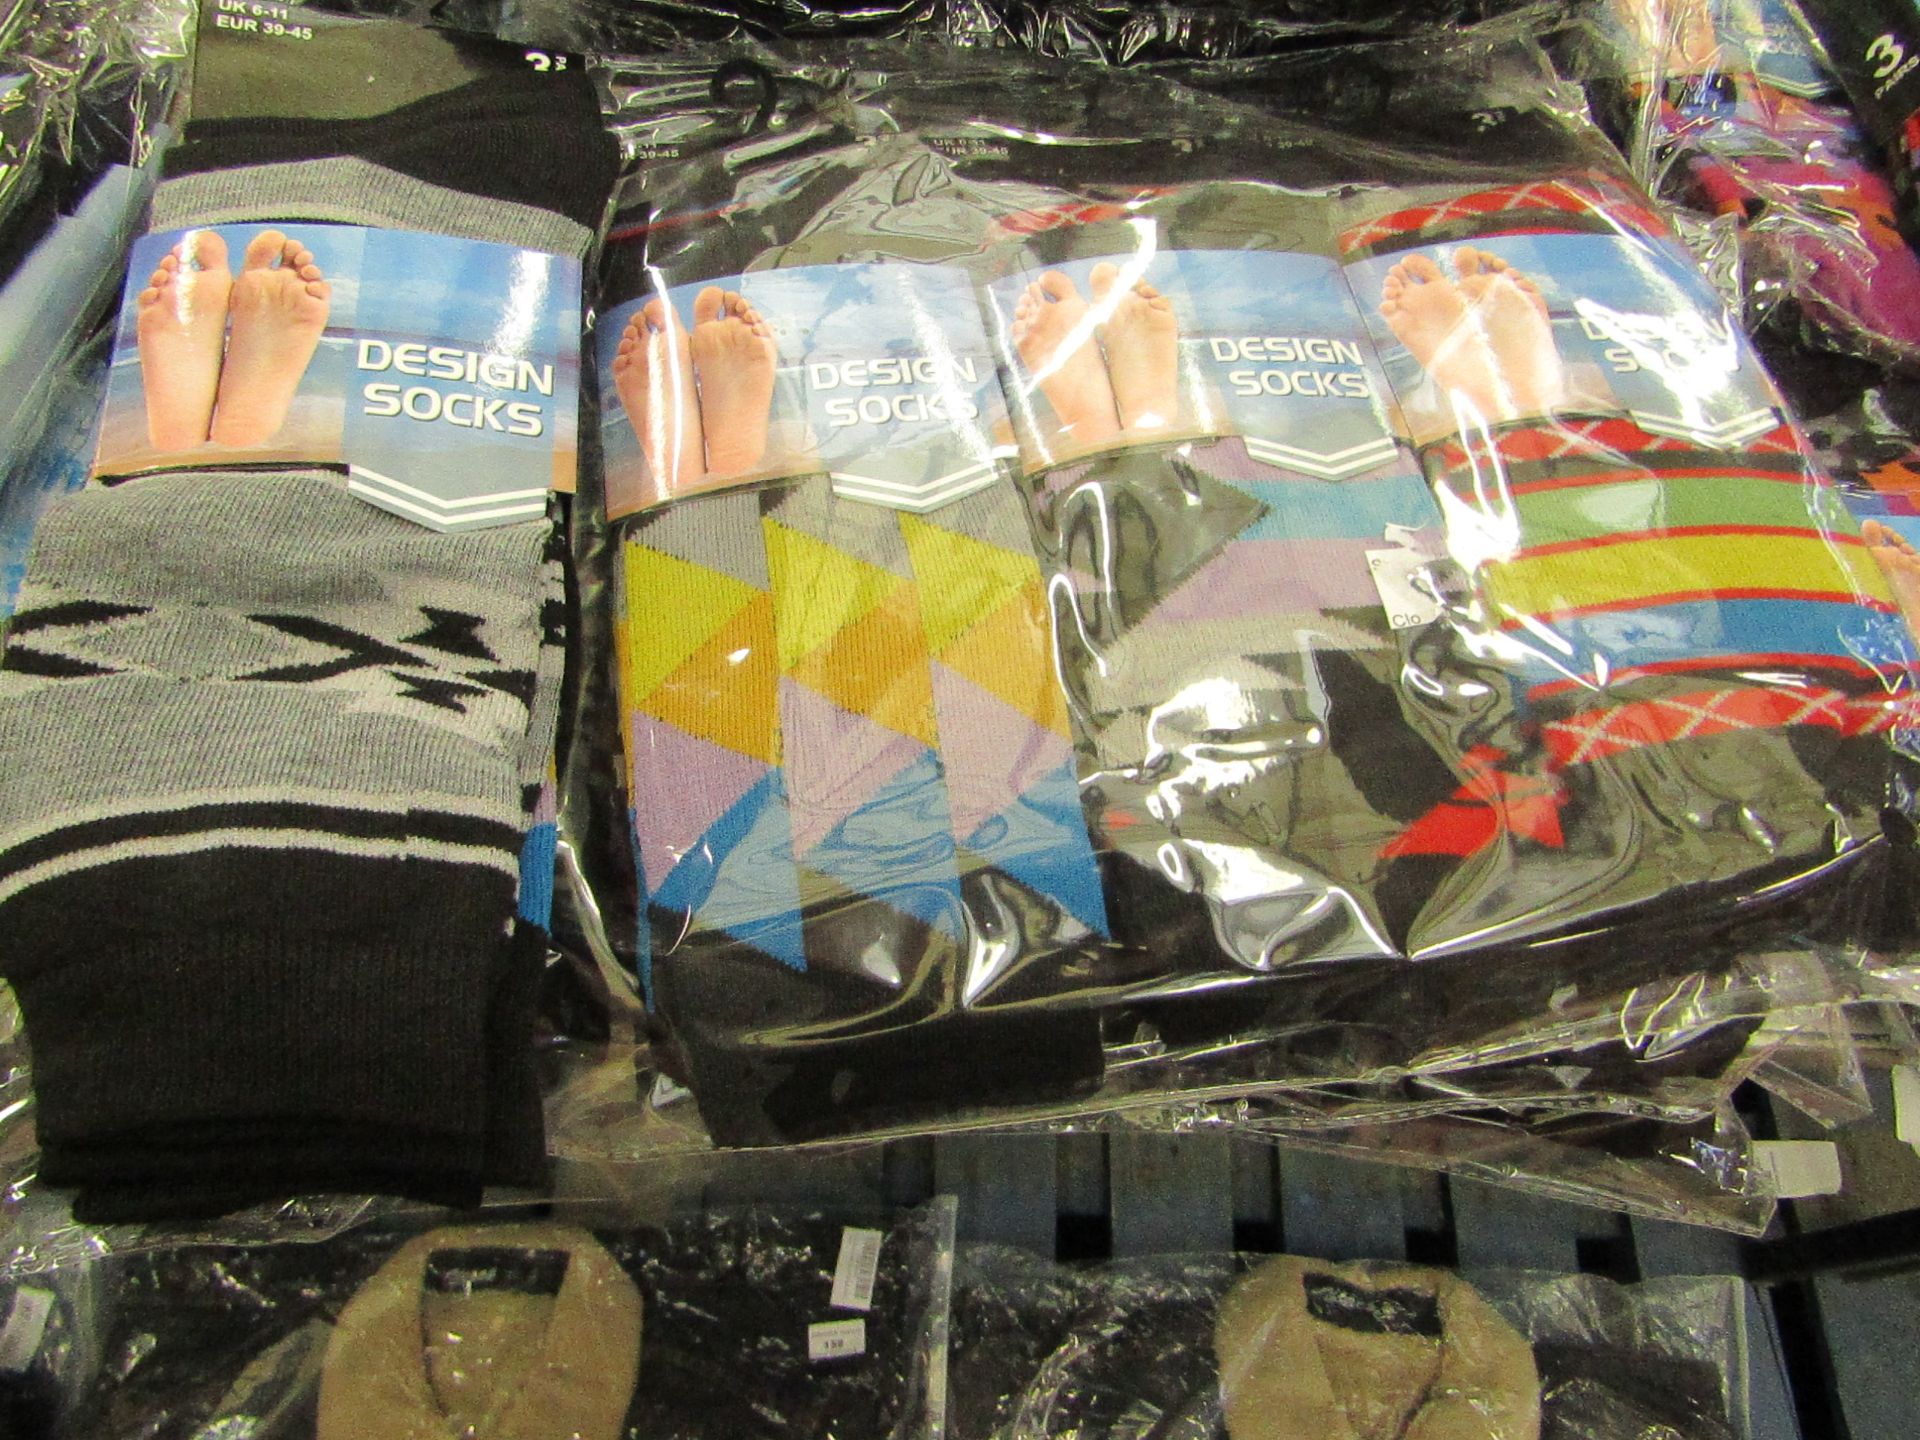 Pack of 12 pairs Mens Design Patterned Socks, size 6-11 all new in packaging see image for design